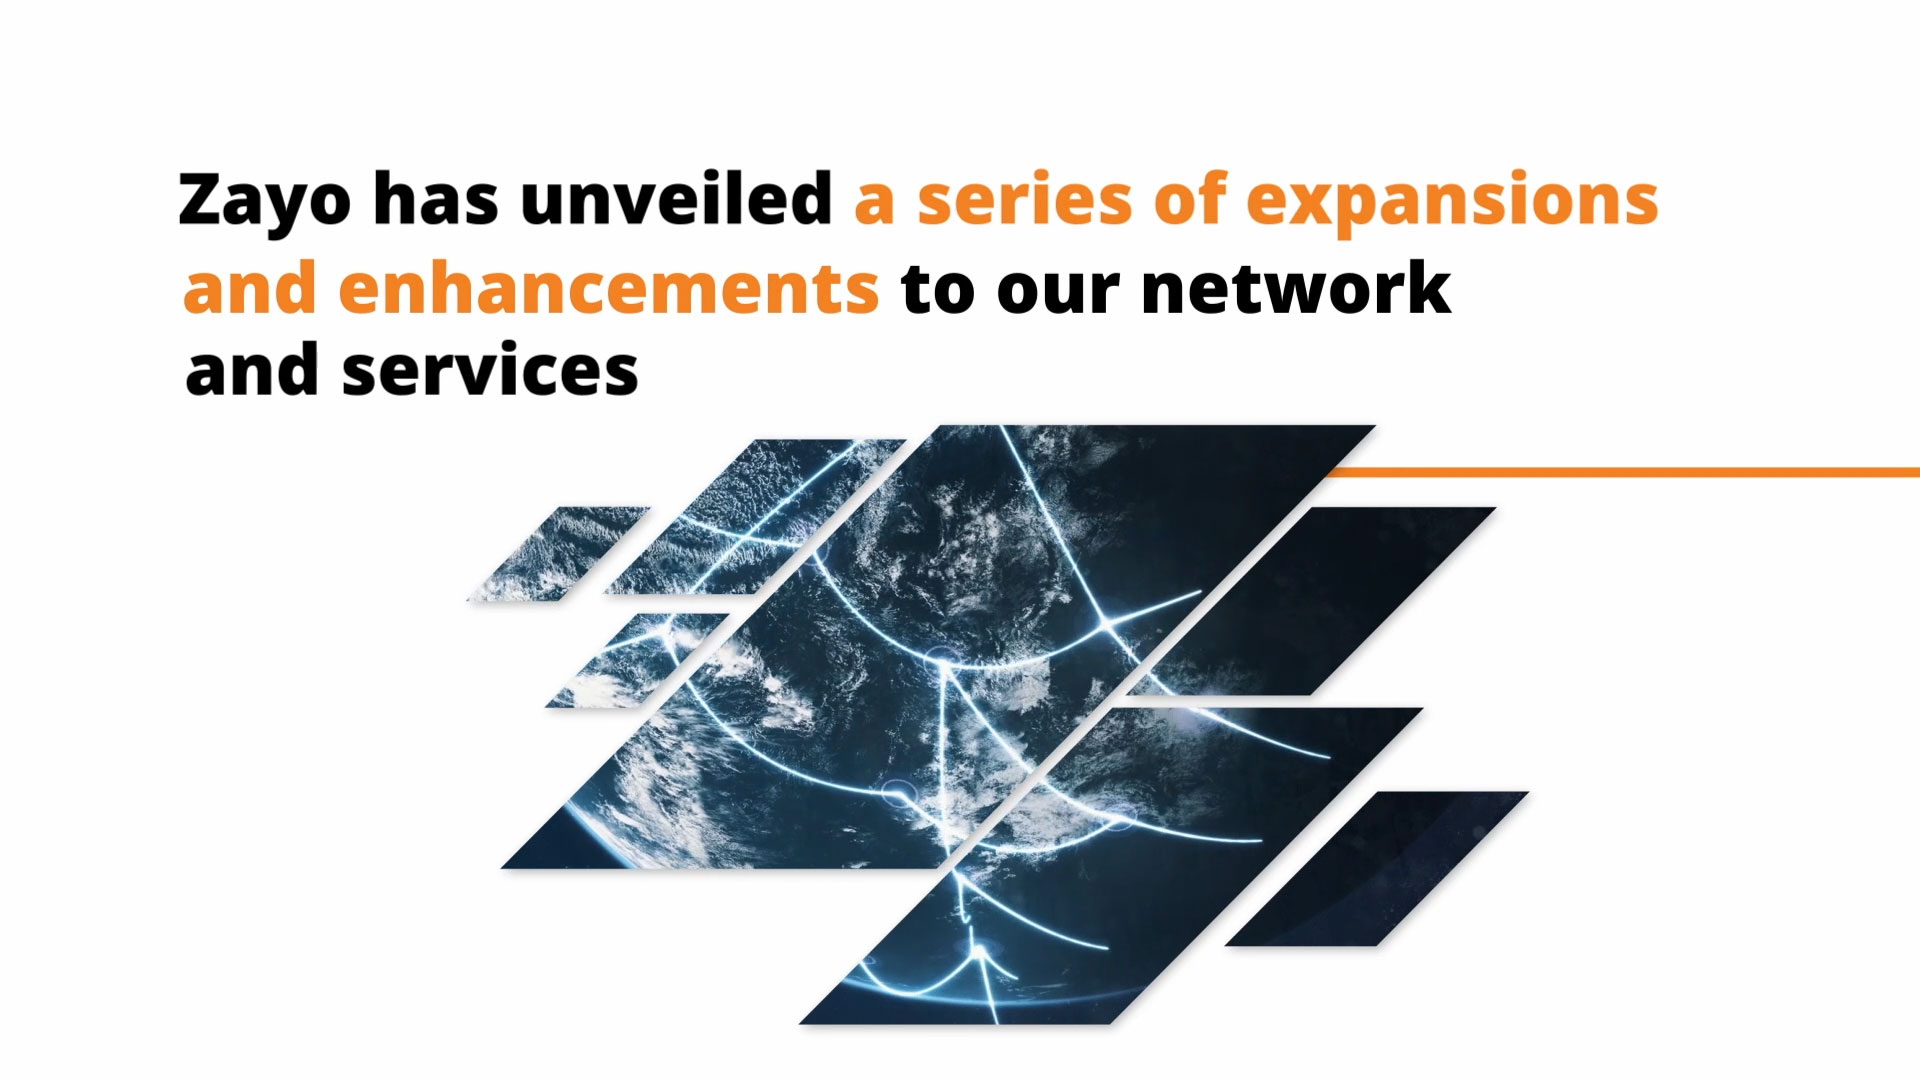 Zayo has announced a series of expansions and enhancements to its network and services.